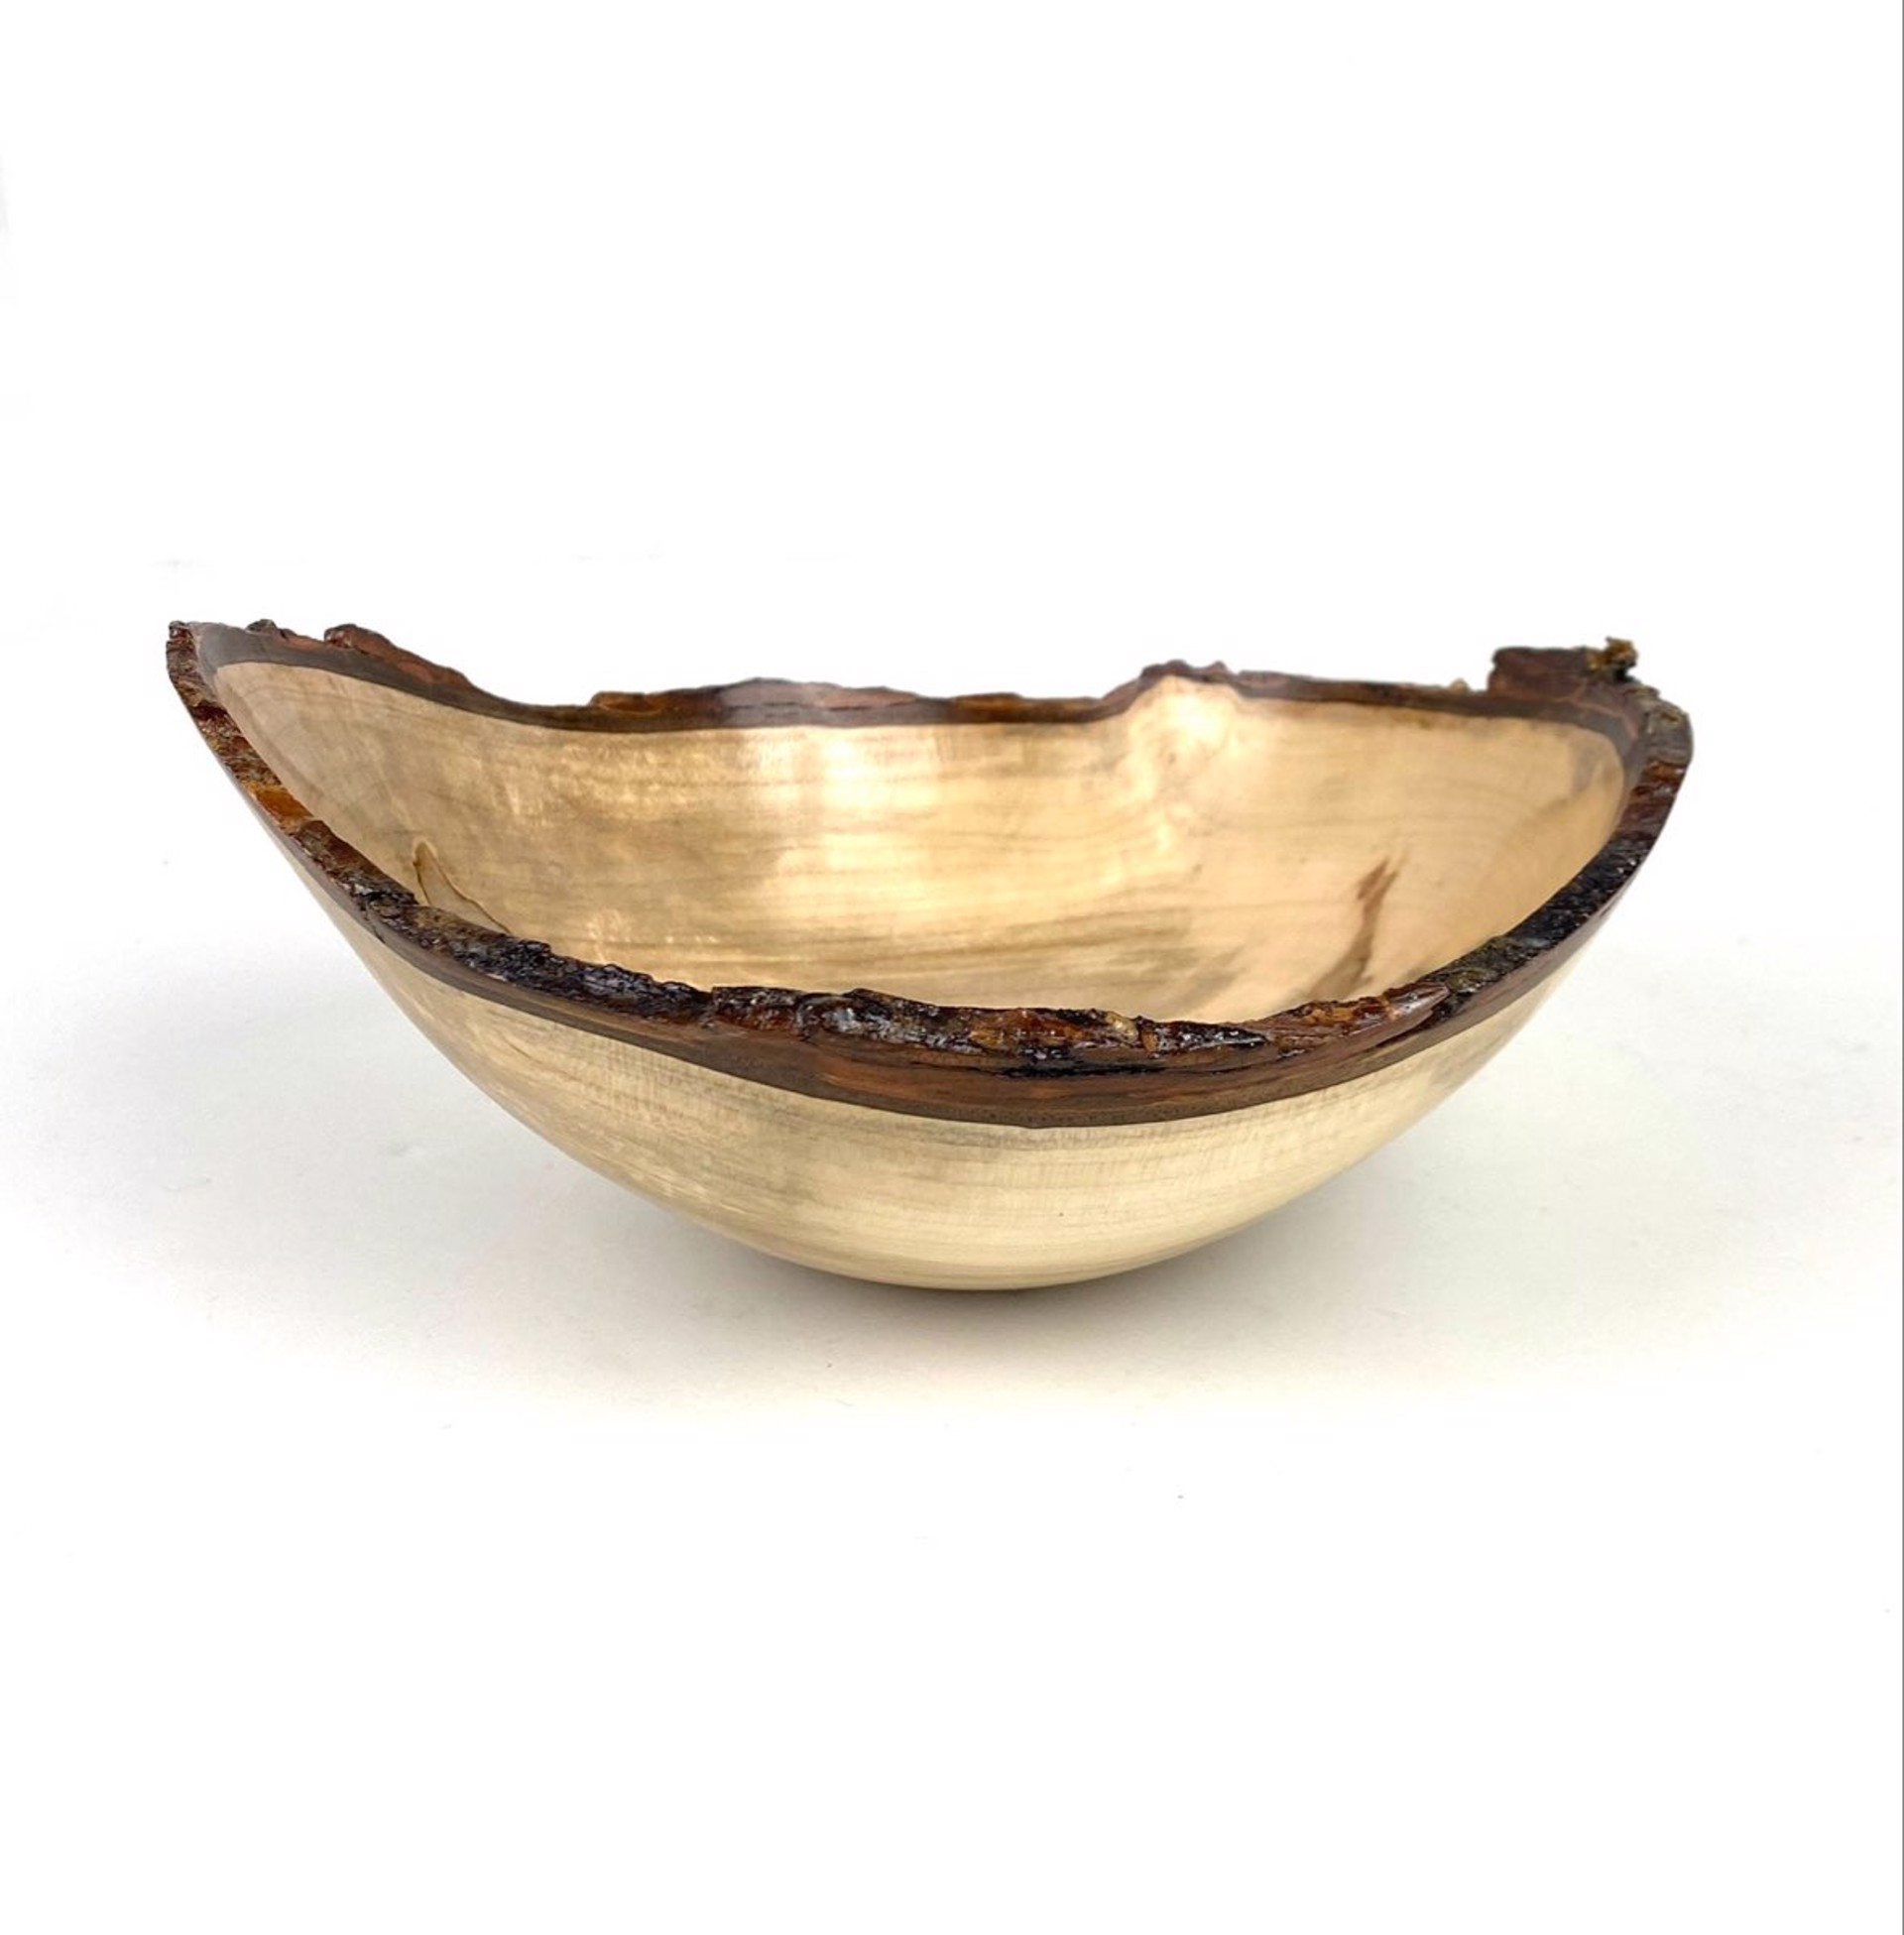 Maple Bowl with Natural Edge by Don Moore